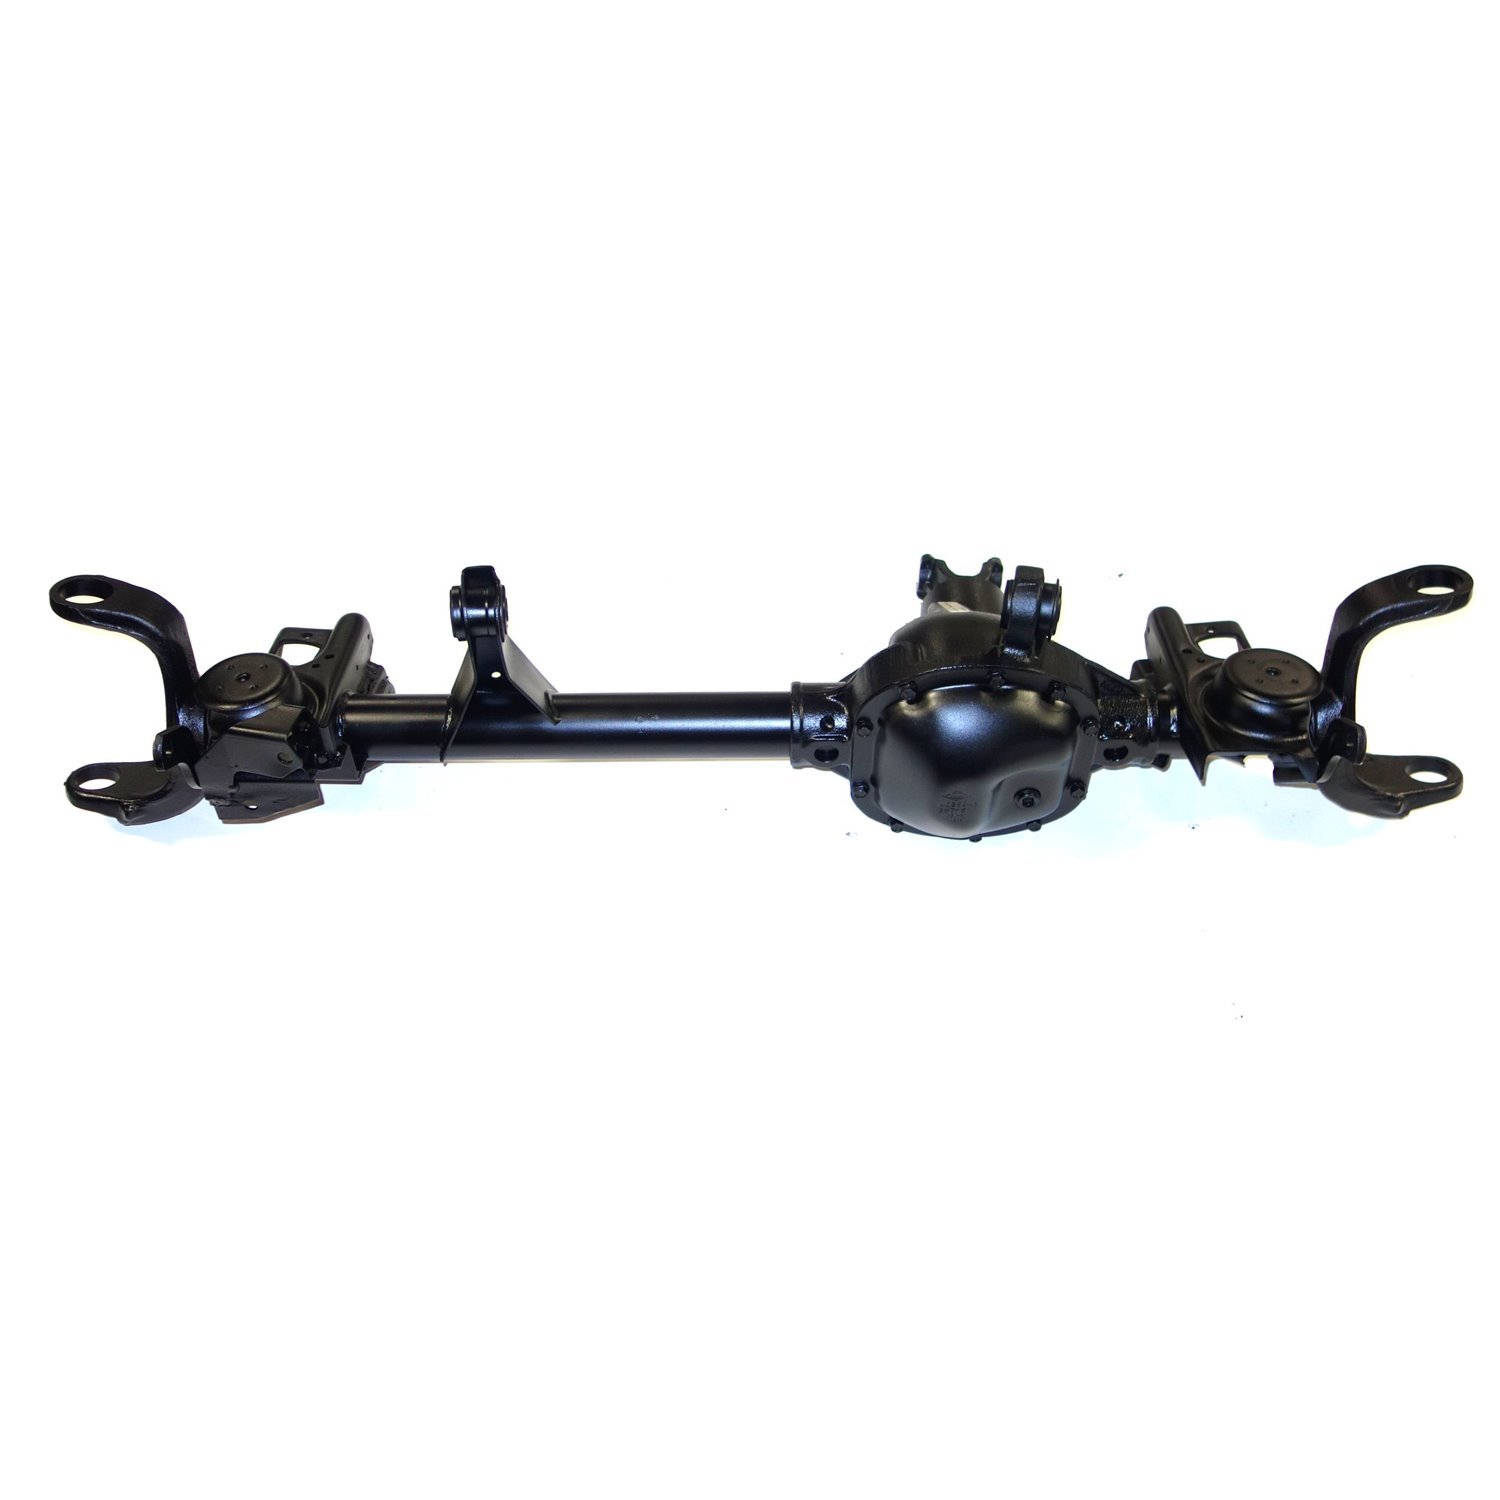 Remanufactured Complete Axle Assembly for Dana 30 97-99 Jeep Wrangler 3.55 Ratio with ABS